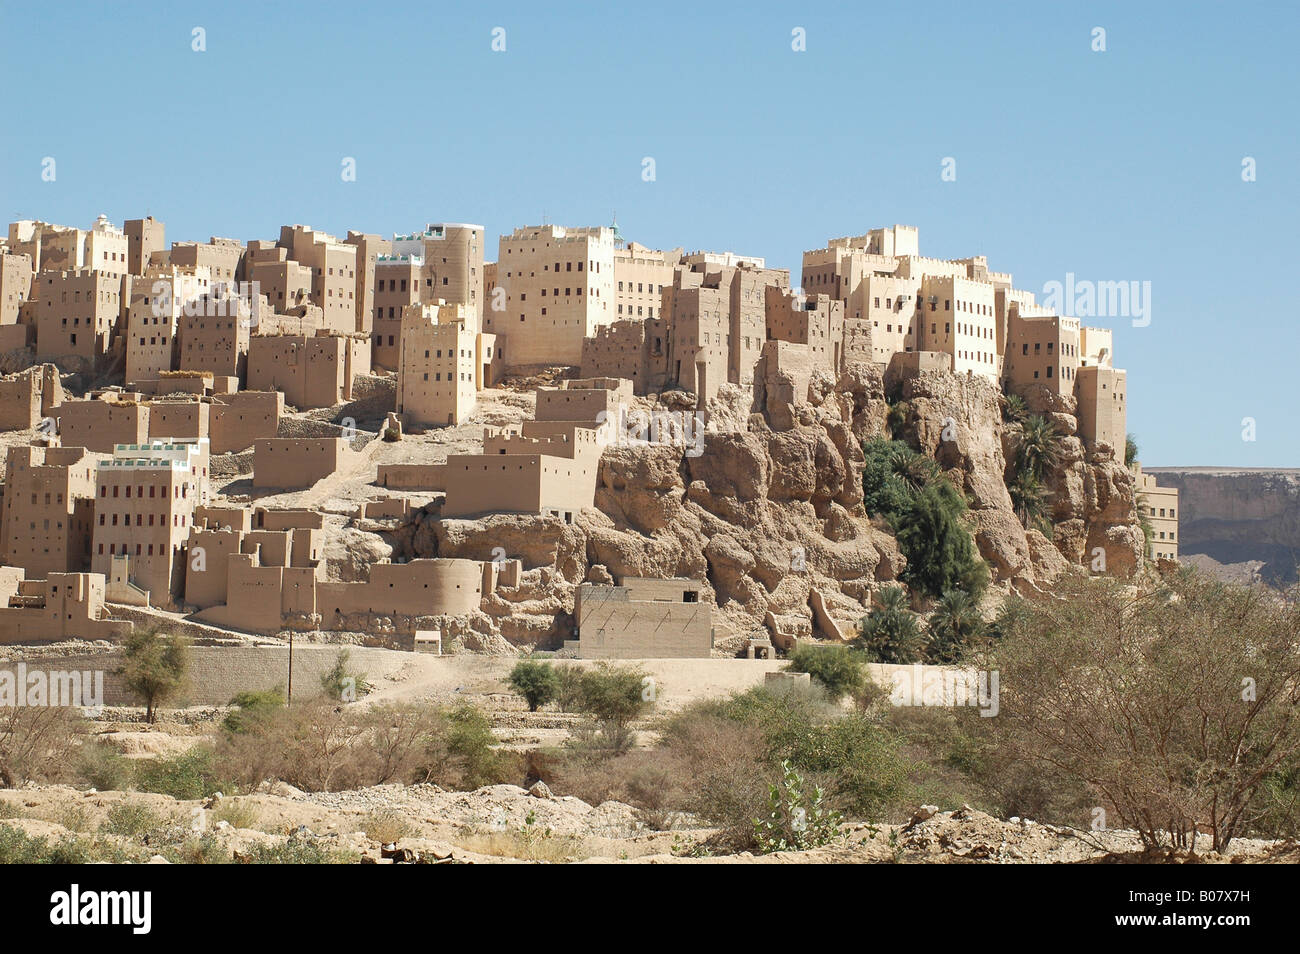 In Yemen's Wadi Do'an a village's sand-coloured houses rise from the terrain like children's building blocks Stock Photo